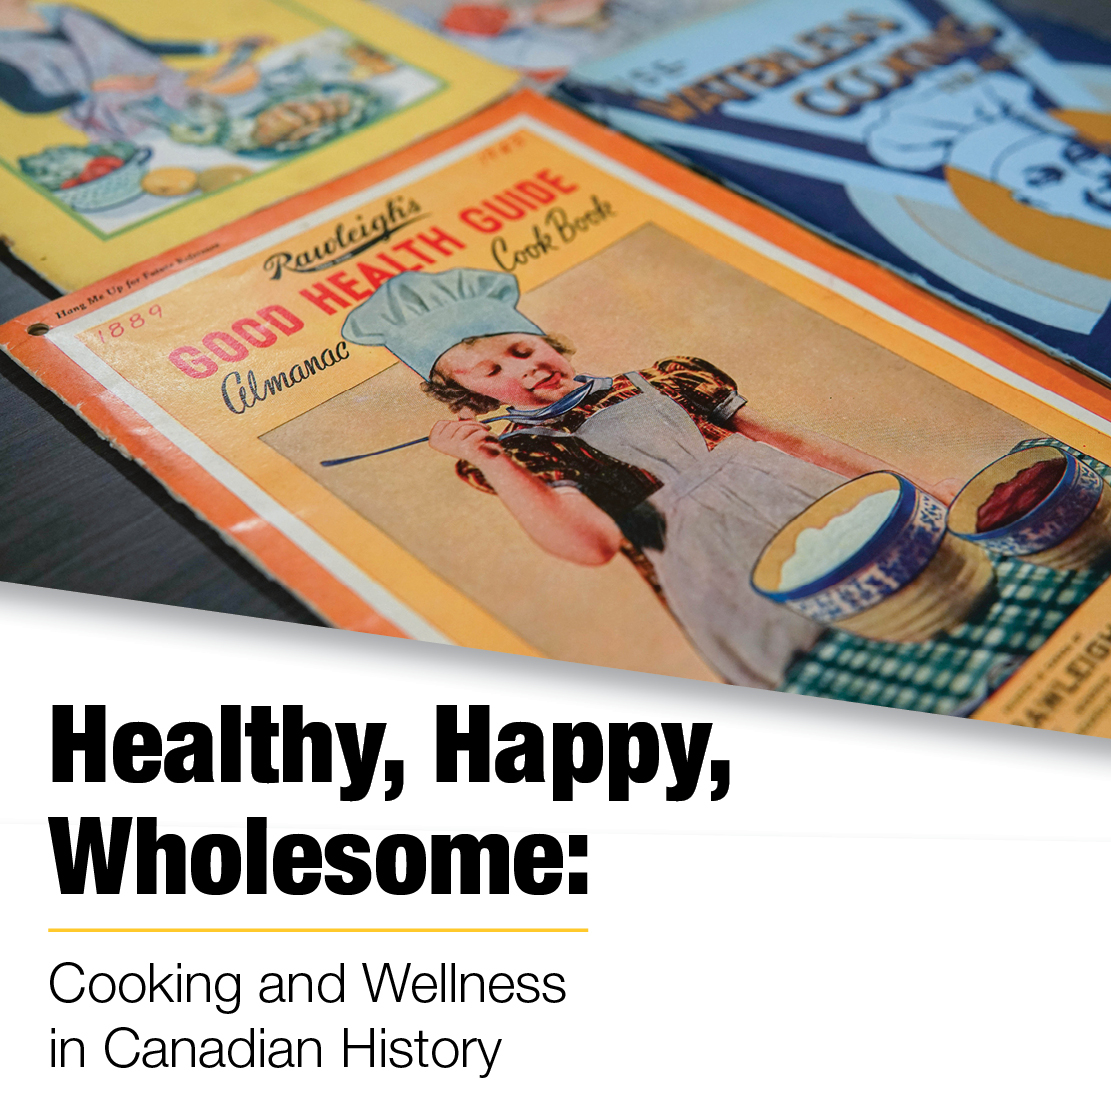 Healthy, Happy, Wholesome: Cooking and Wellness in Canadian History. Cookbooks from the collection.